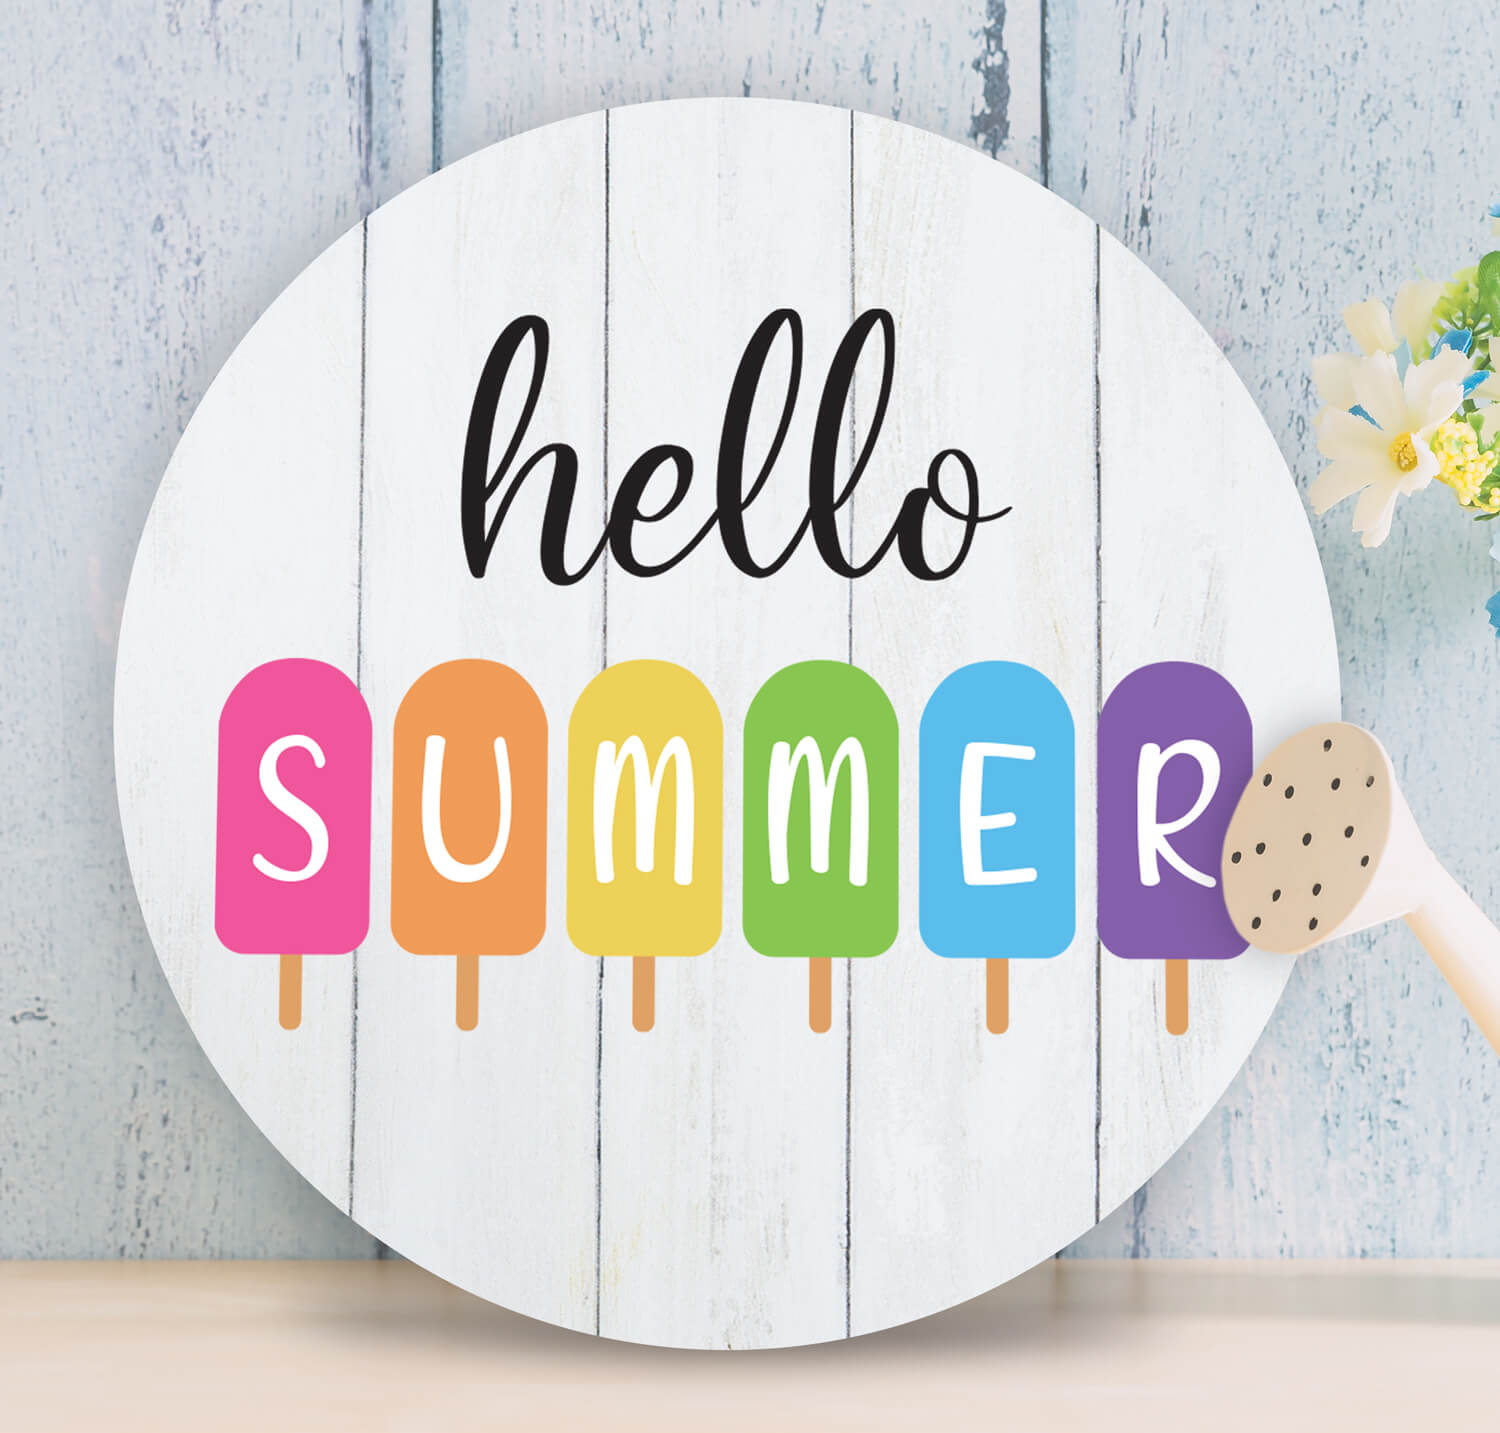 wood round home decor customized with 'hello summer' and colorful popsicle images